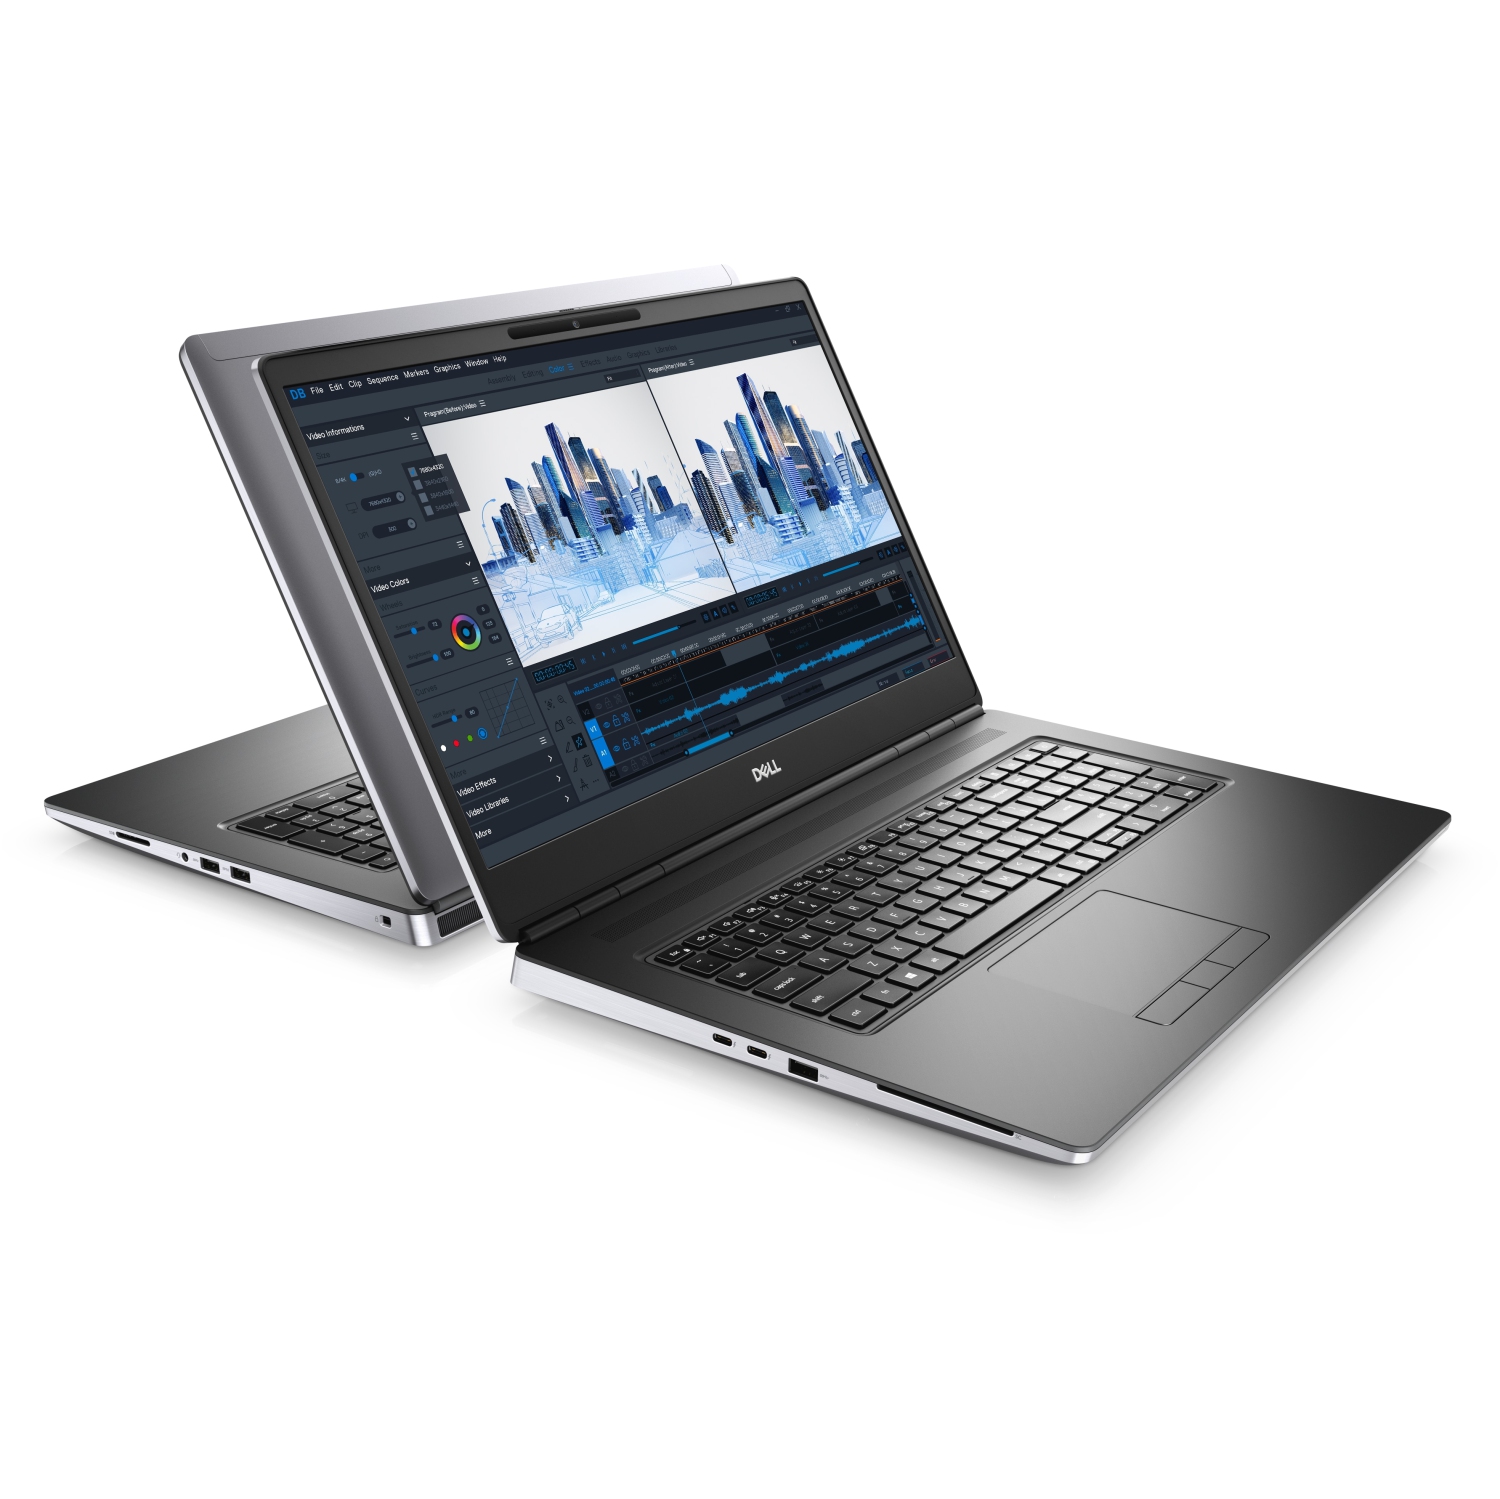 Refurbished (Excellent) - Dell Precision 7000 7760 Workstation Laptop (2021), 17.3" 4K, Core i9, 2TB SSD, 128GB RAM, RTX A5000, 8 Cores @ 5 GHz, 11th Gen CPU Certified